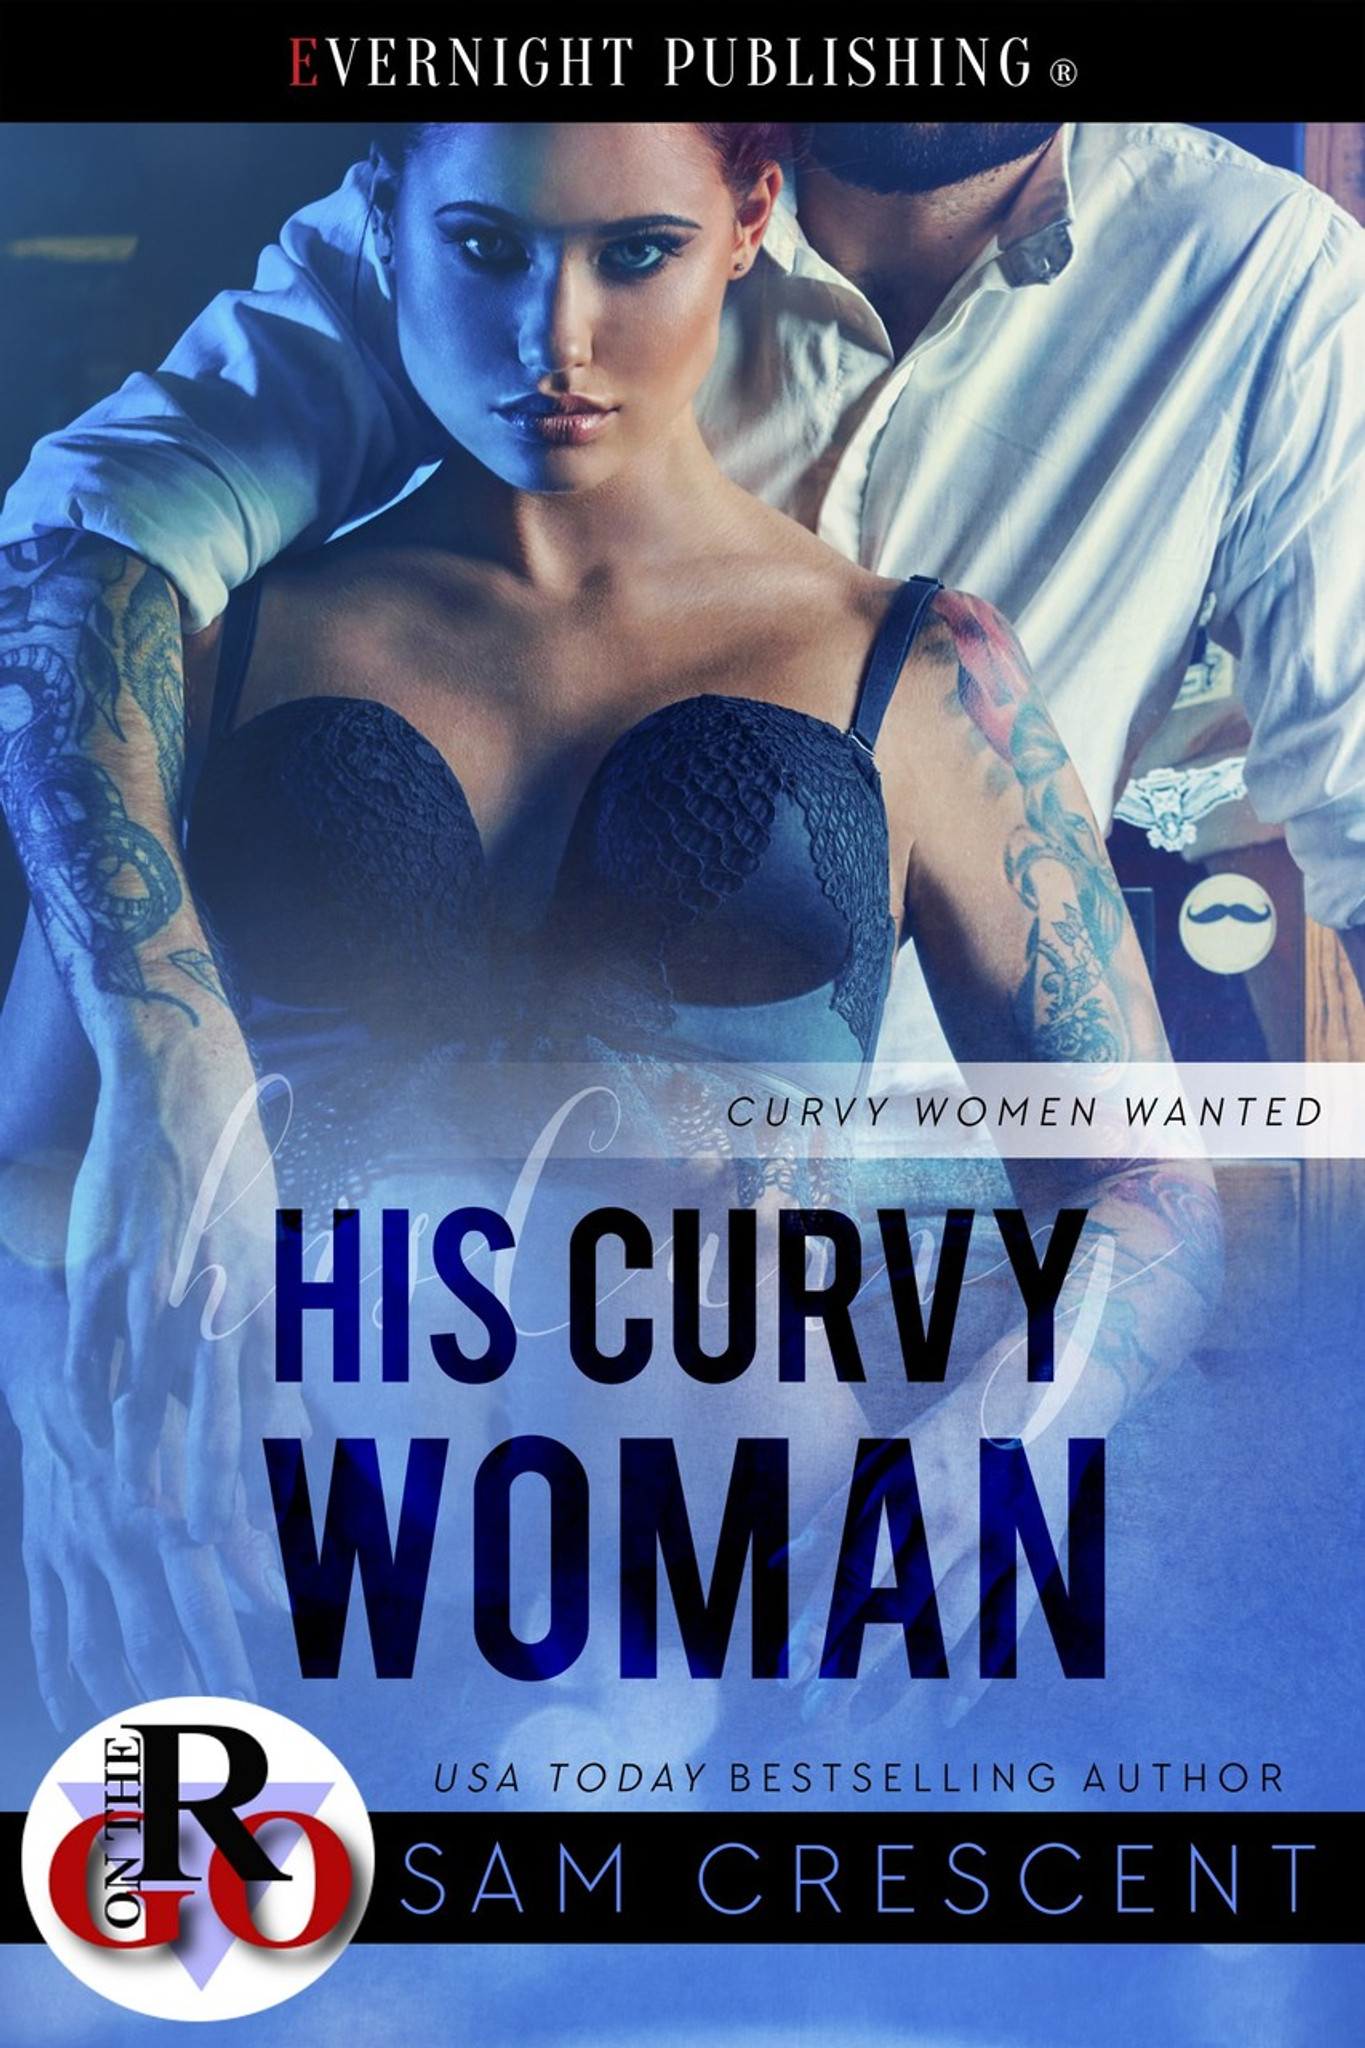 His Curvy Woman by Sam Crescent photo pic image